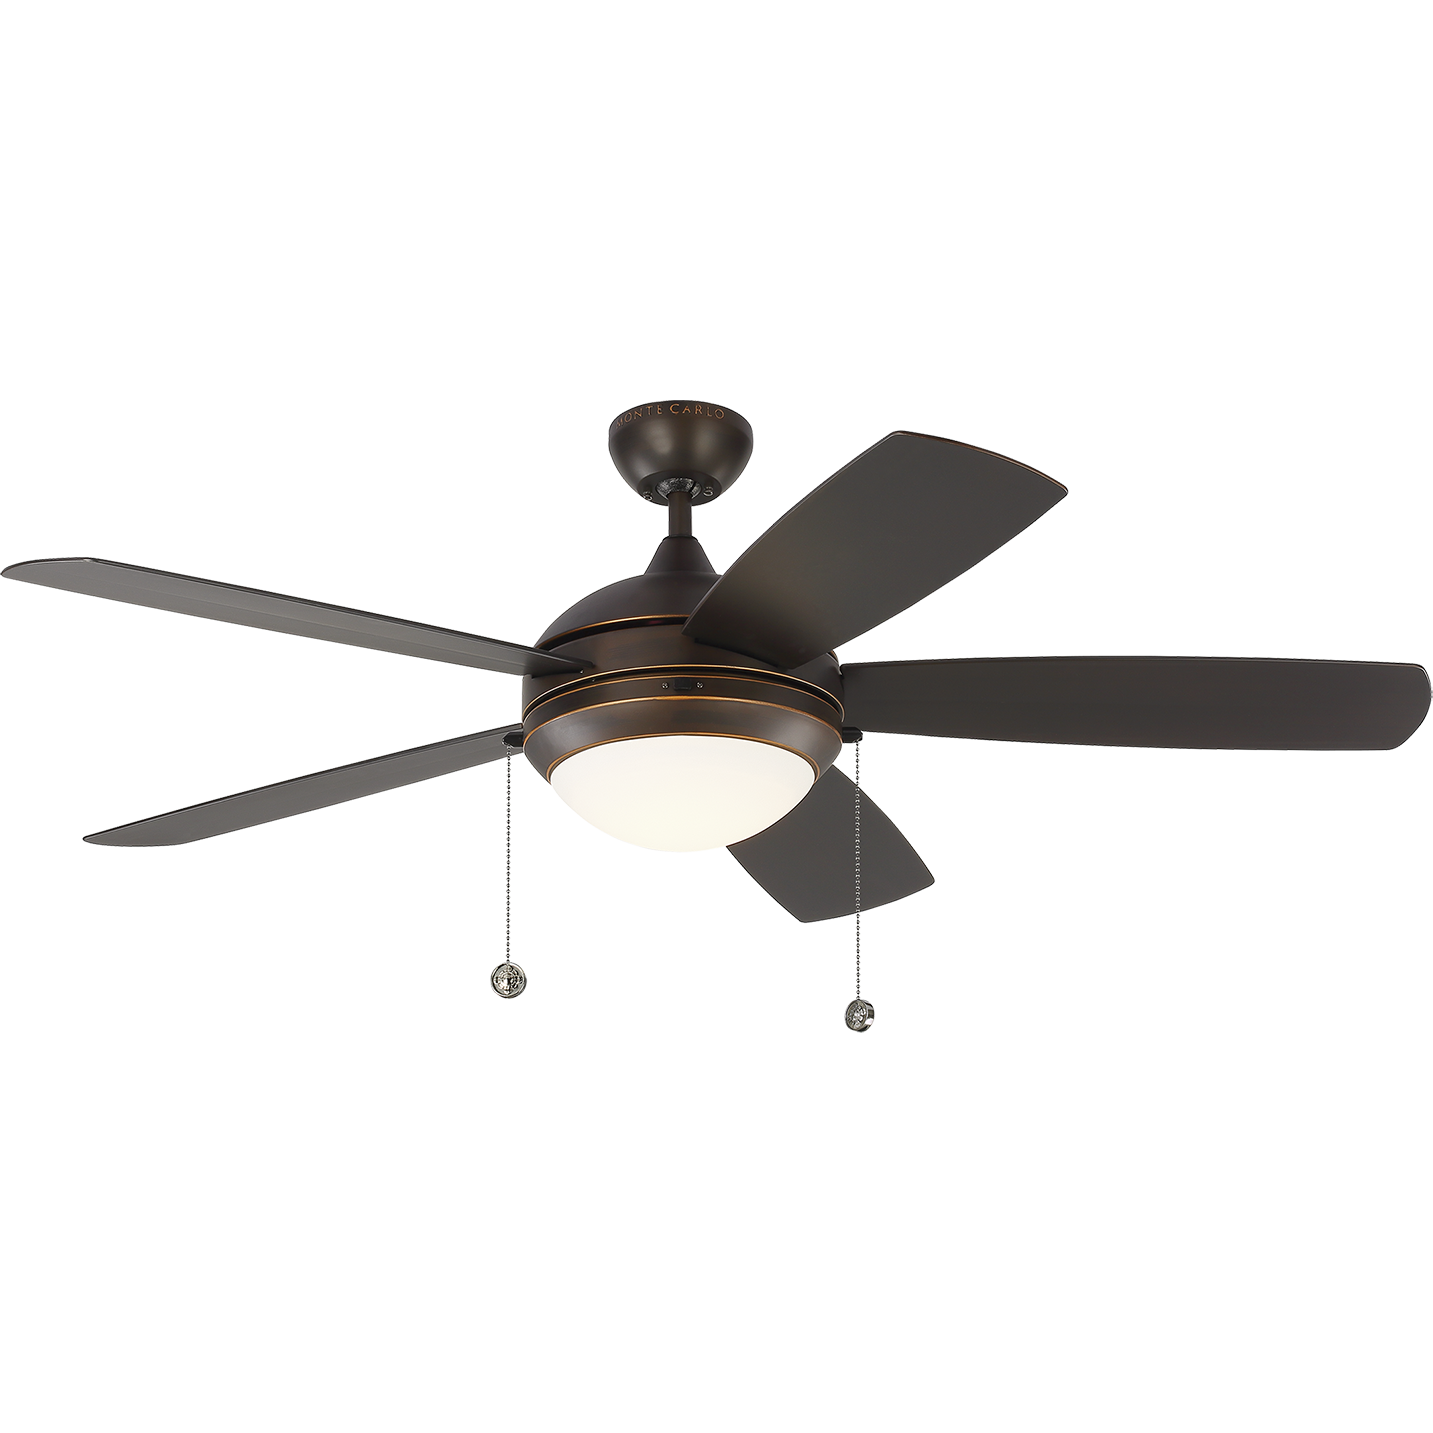 Discus Outdoor 52" LED Ceiling Fan